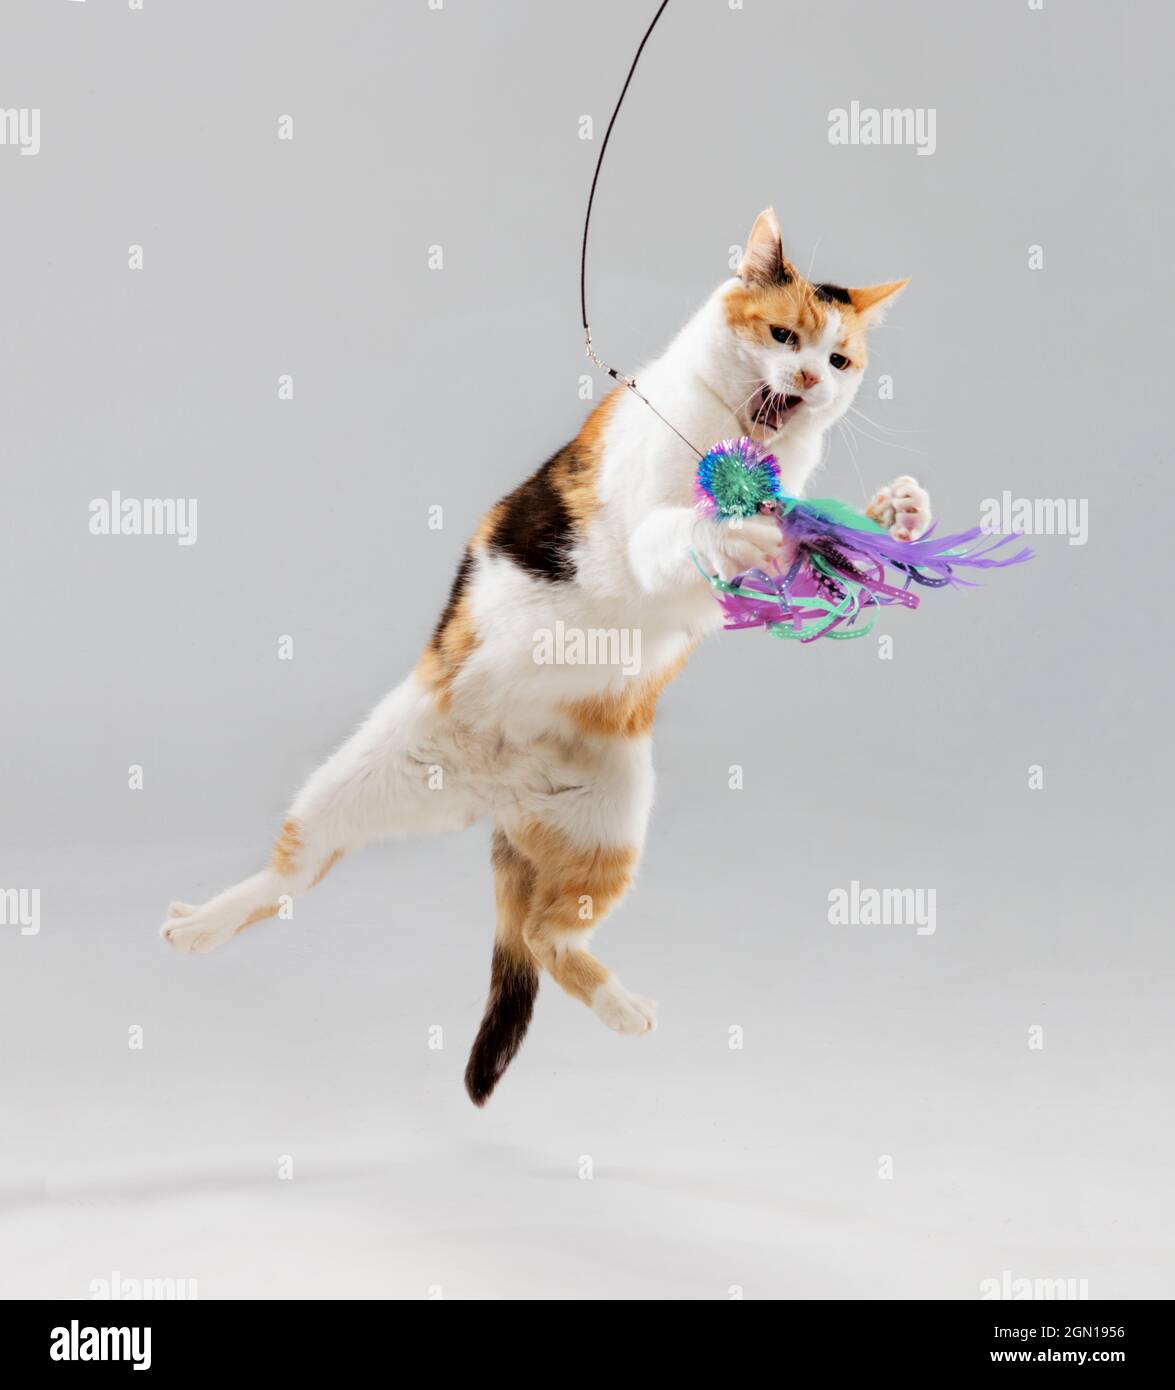 Full-body shot of a Calico cat in studio jumping in air and attacking a colorful toy. Stock Photo